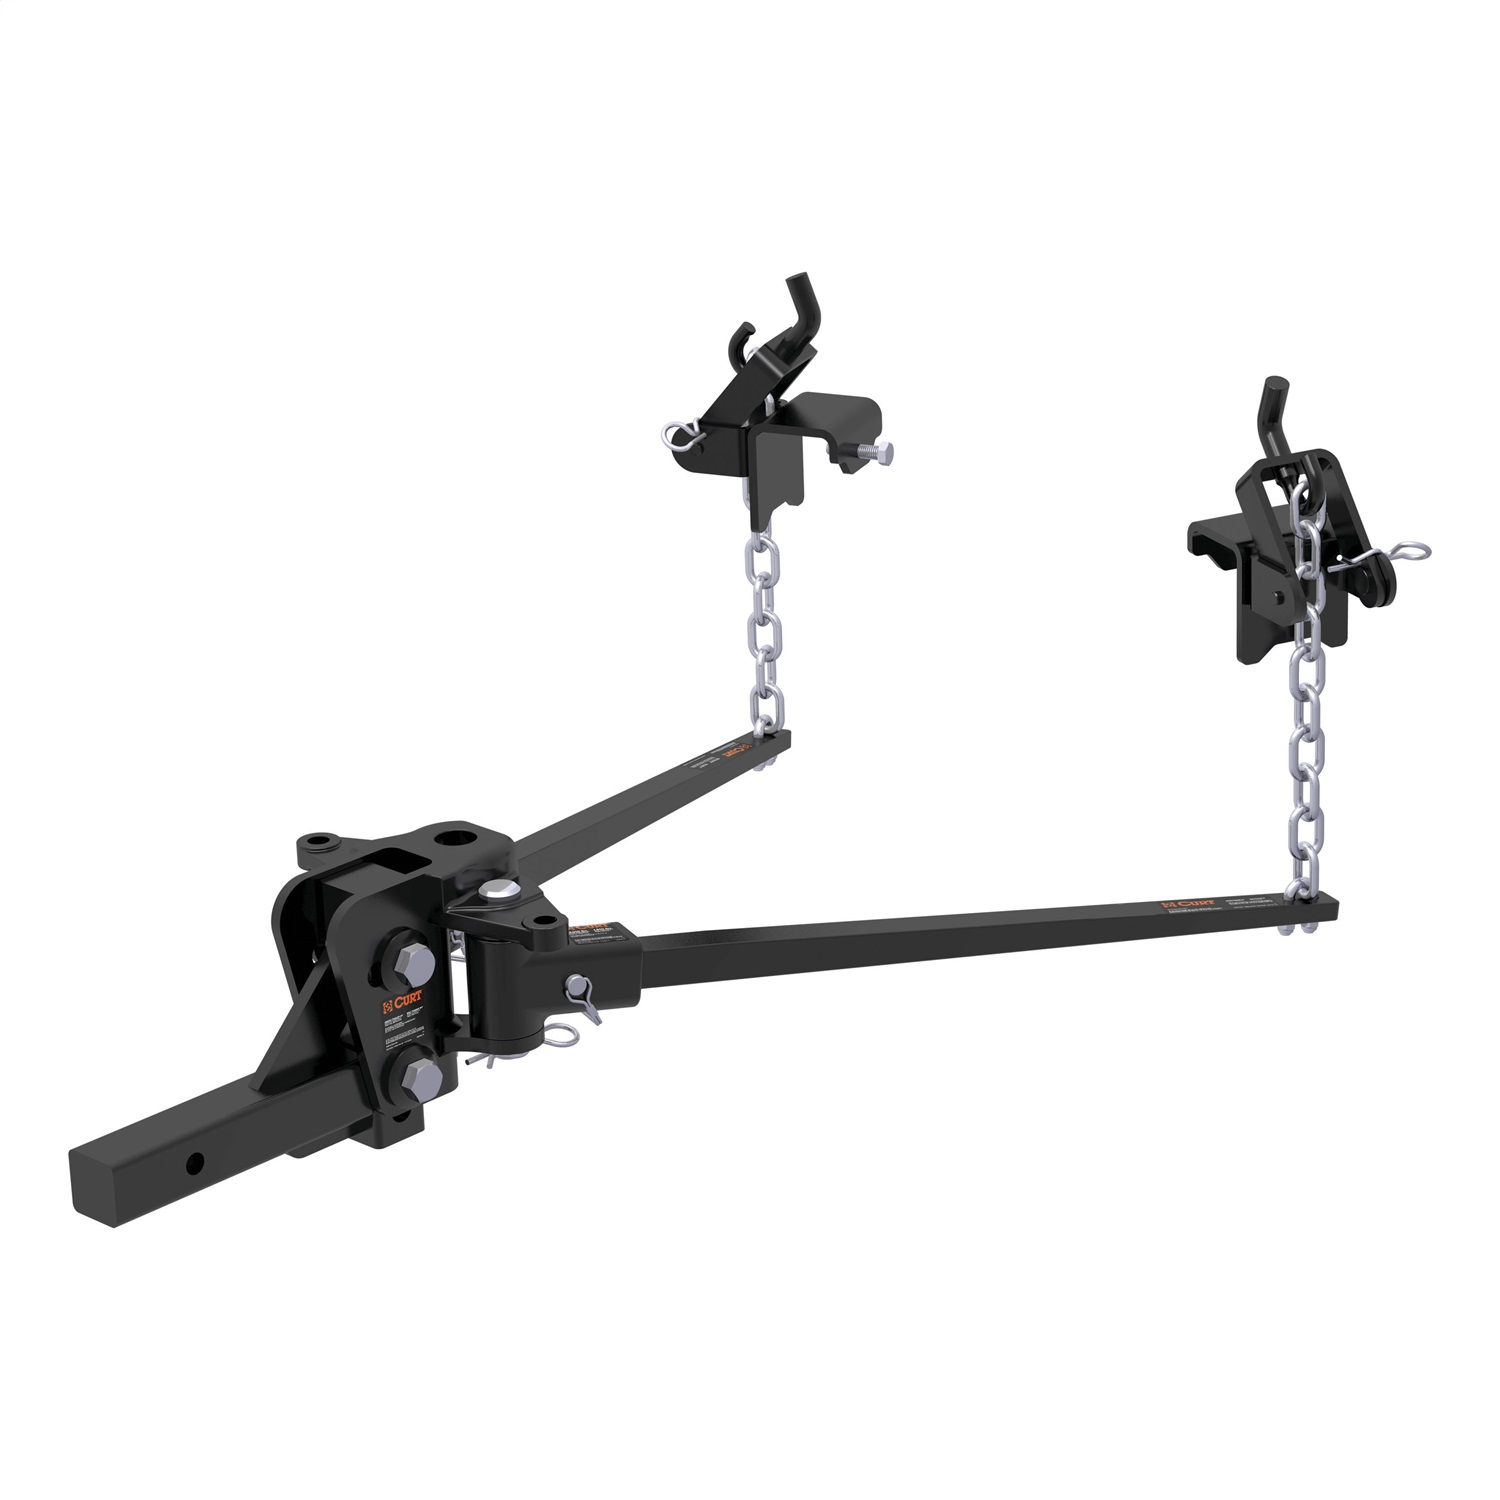 CURT Manufacturing CURT Manufacturing 17347 Weight Distributing Hitch; Trunion Bar  Fits